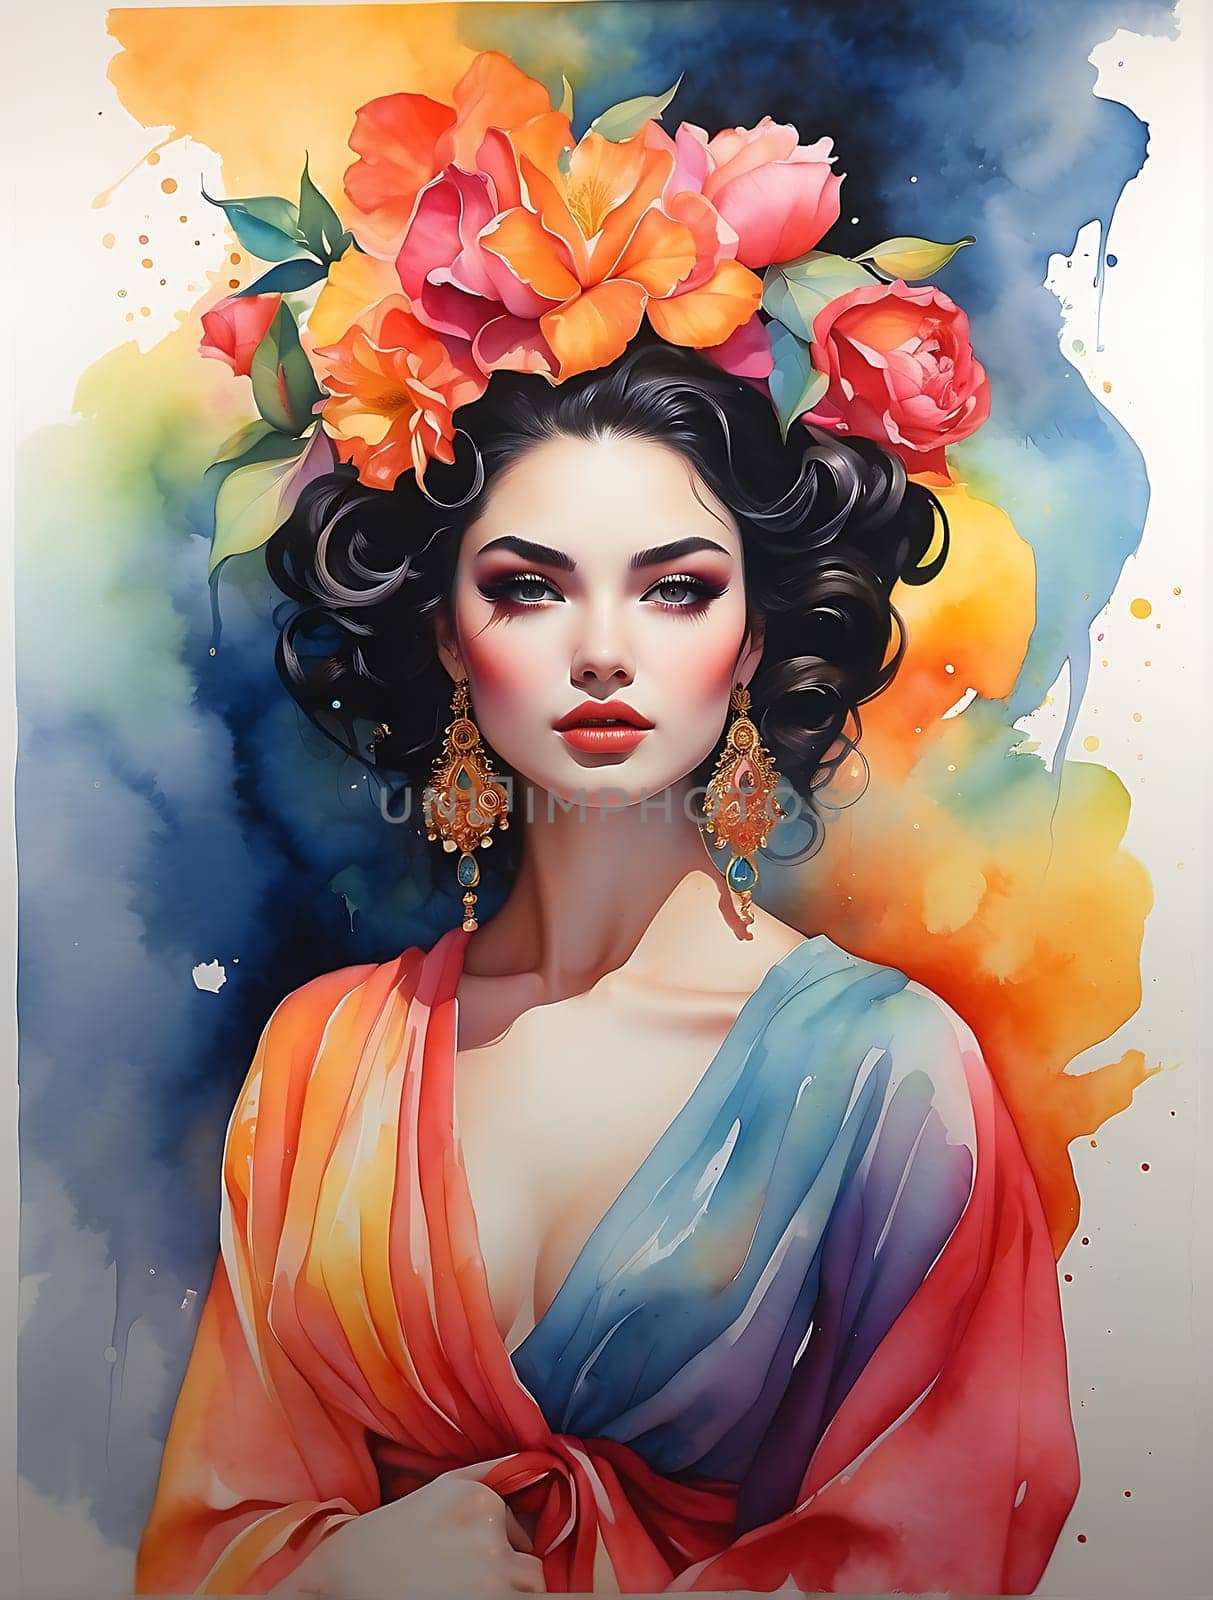 A stunning painting of a woman adorned with flowers in her hair.